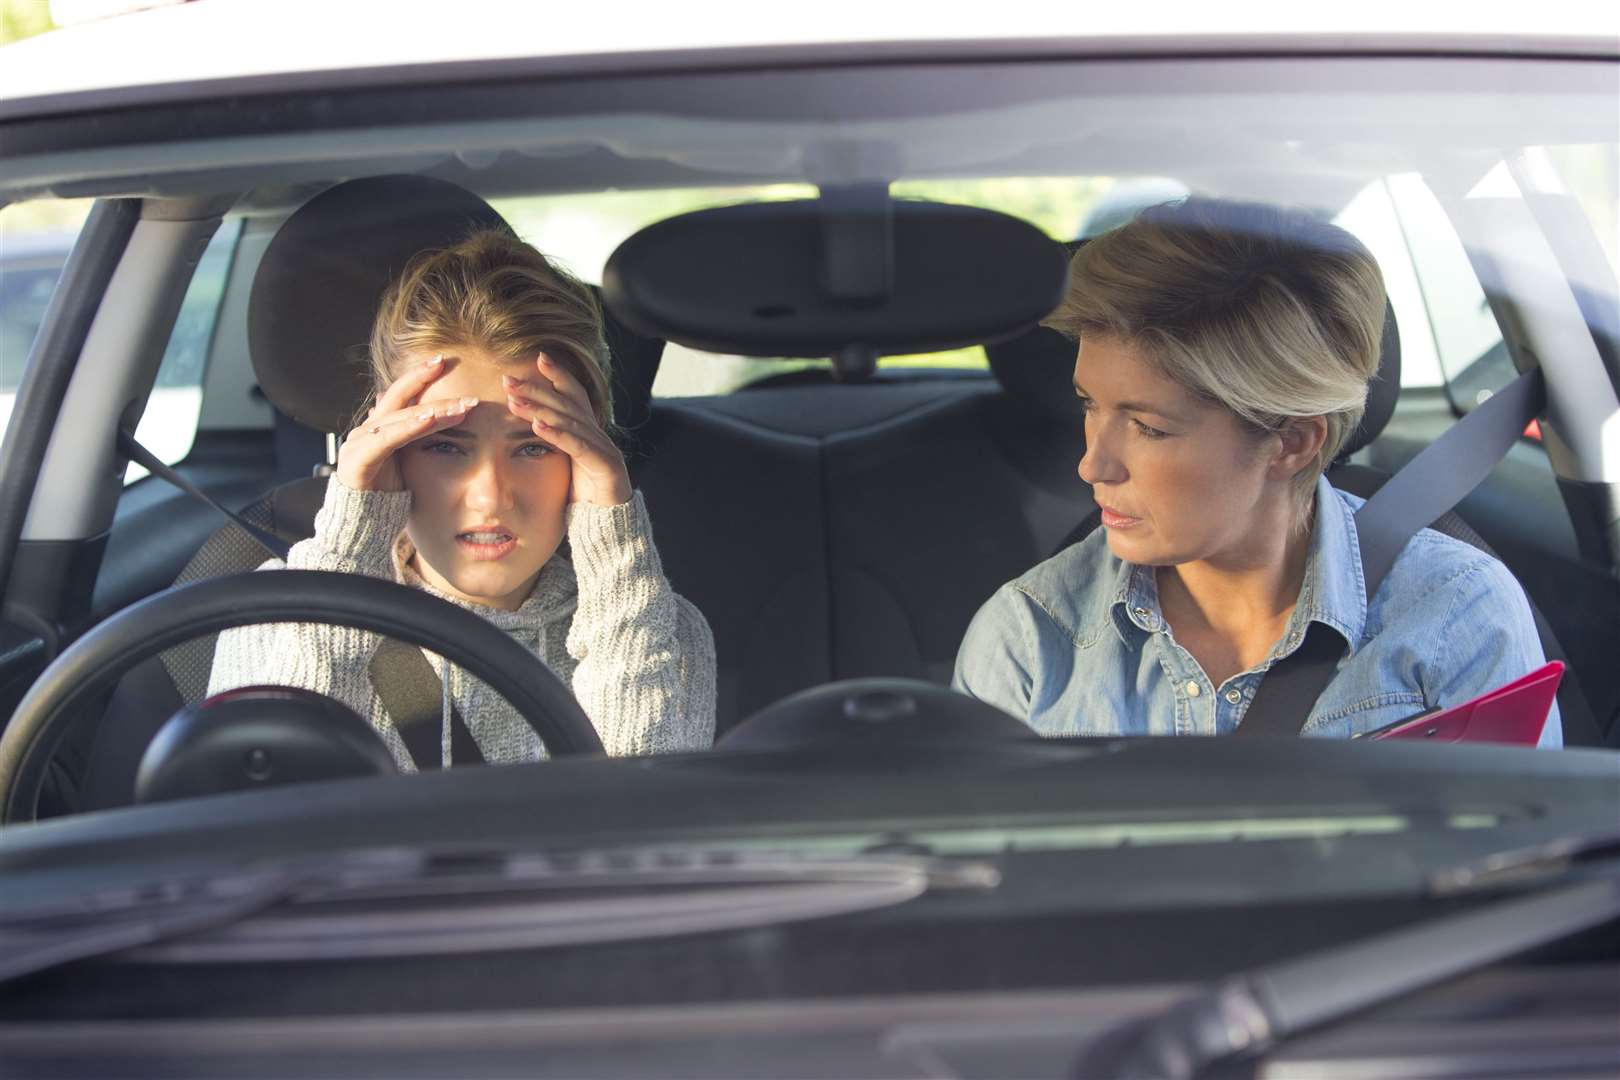 A driving test can be one of the hardest and most stressful days for many